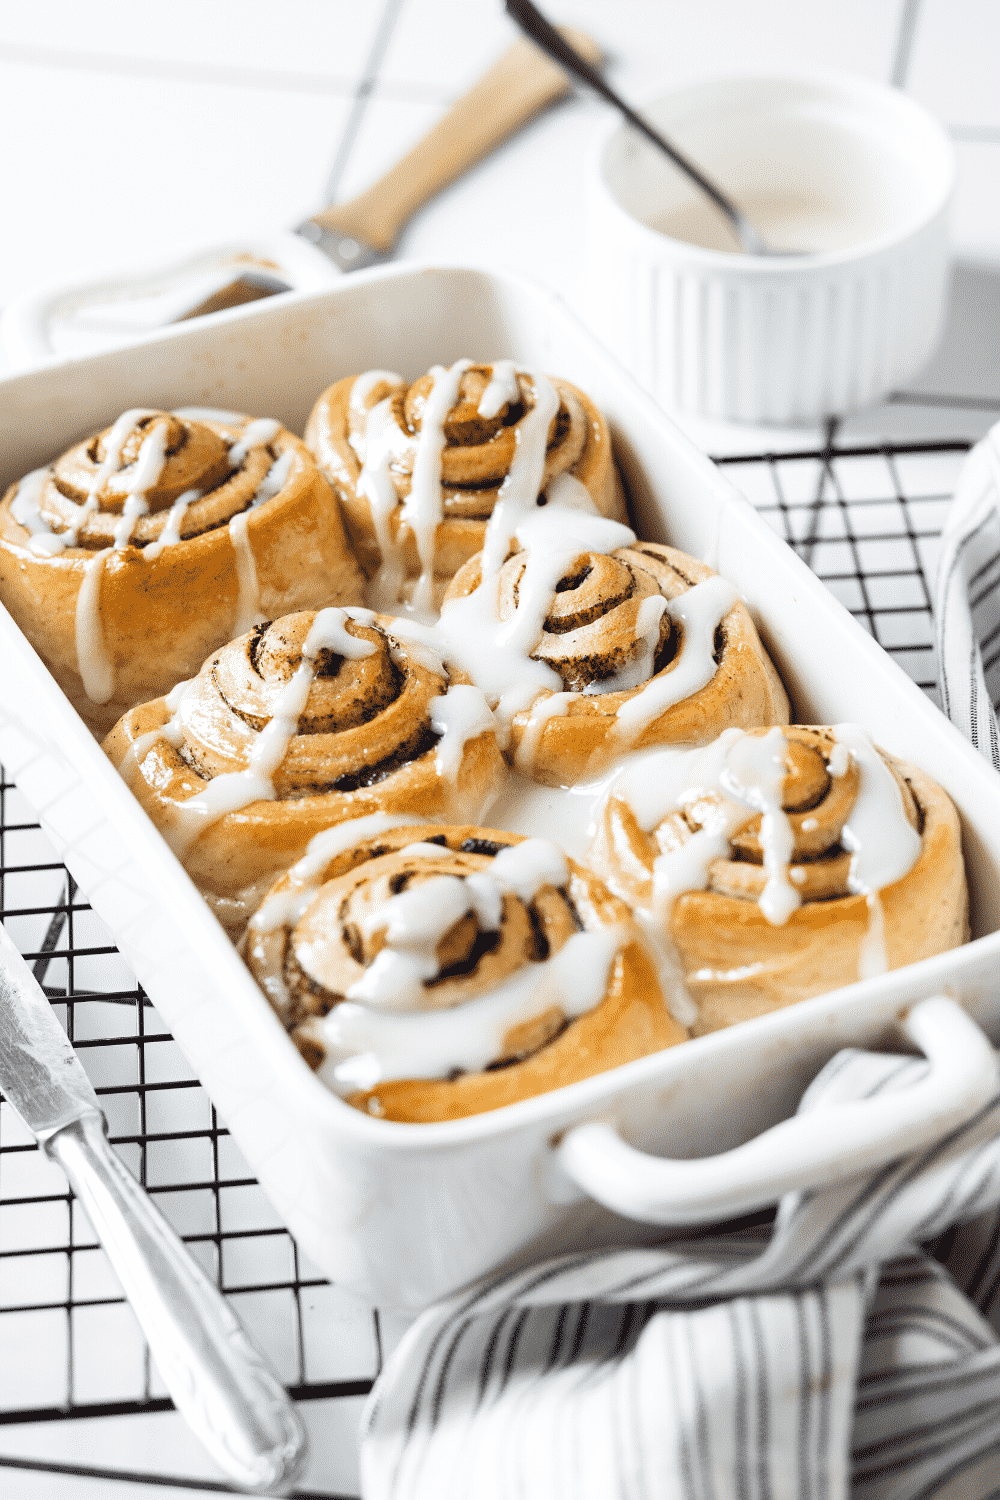 A white baking dish with six cinnamon rolls with icing on top in it. The baking dish is on a black wire rack and a cup of icing is behind the wire rack.